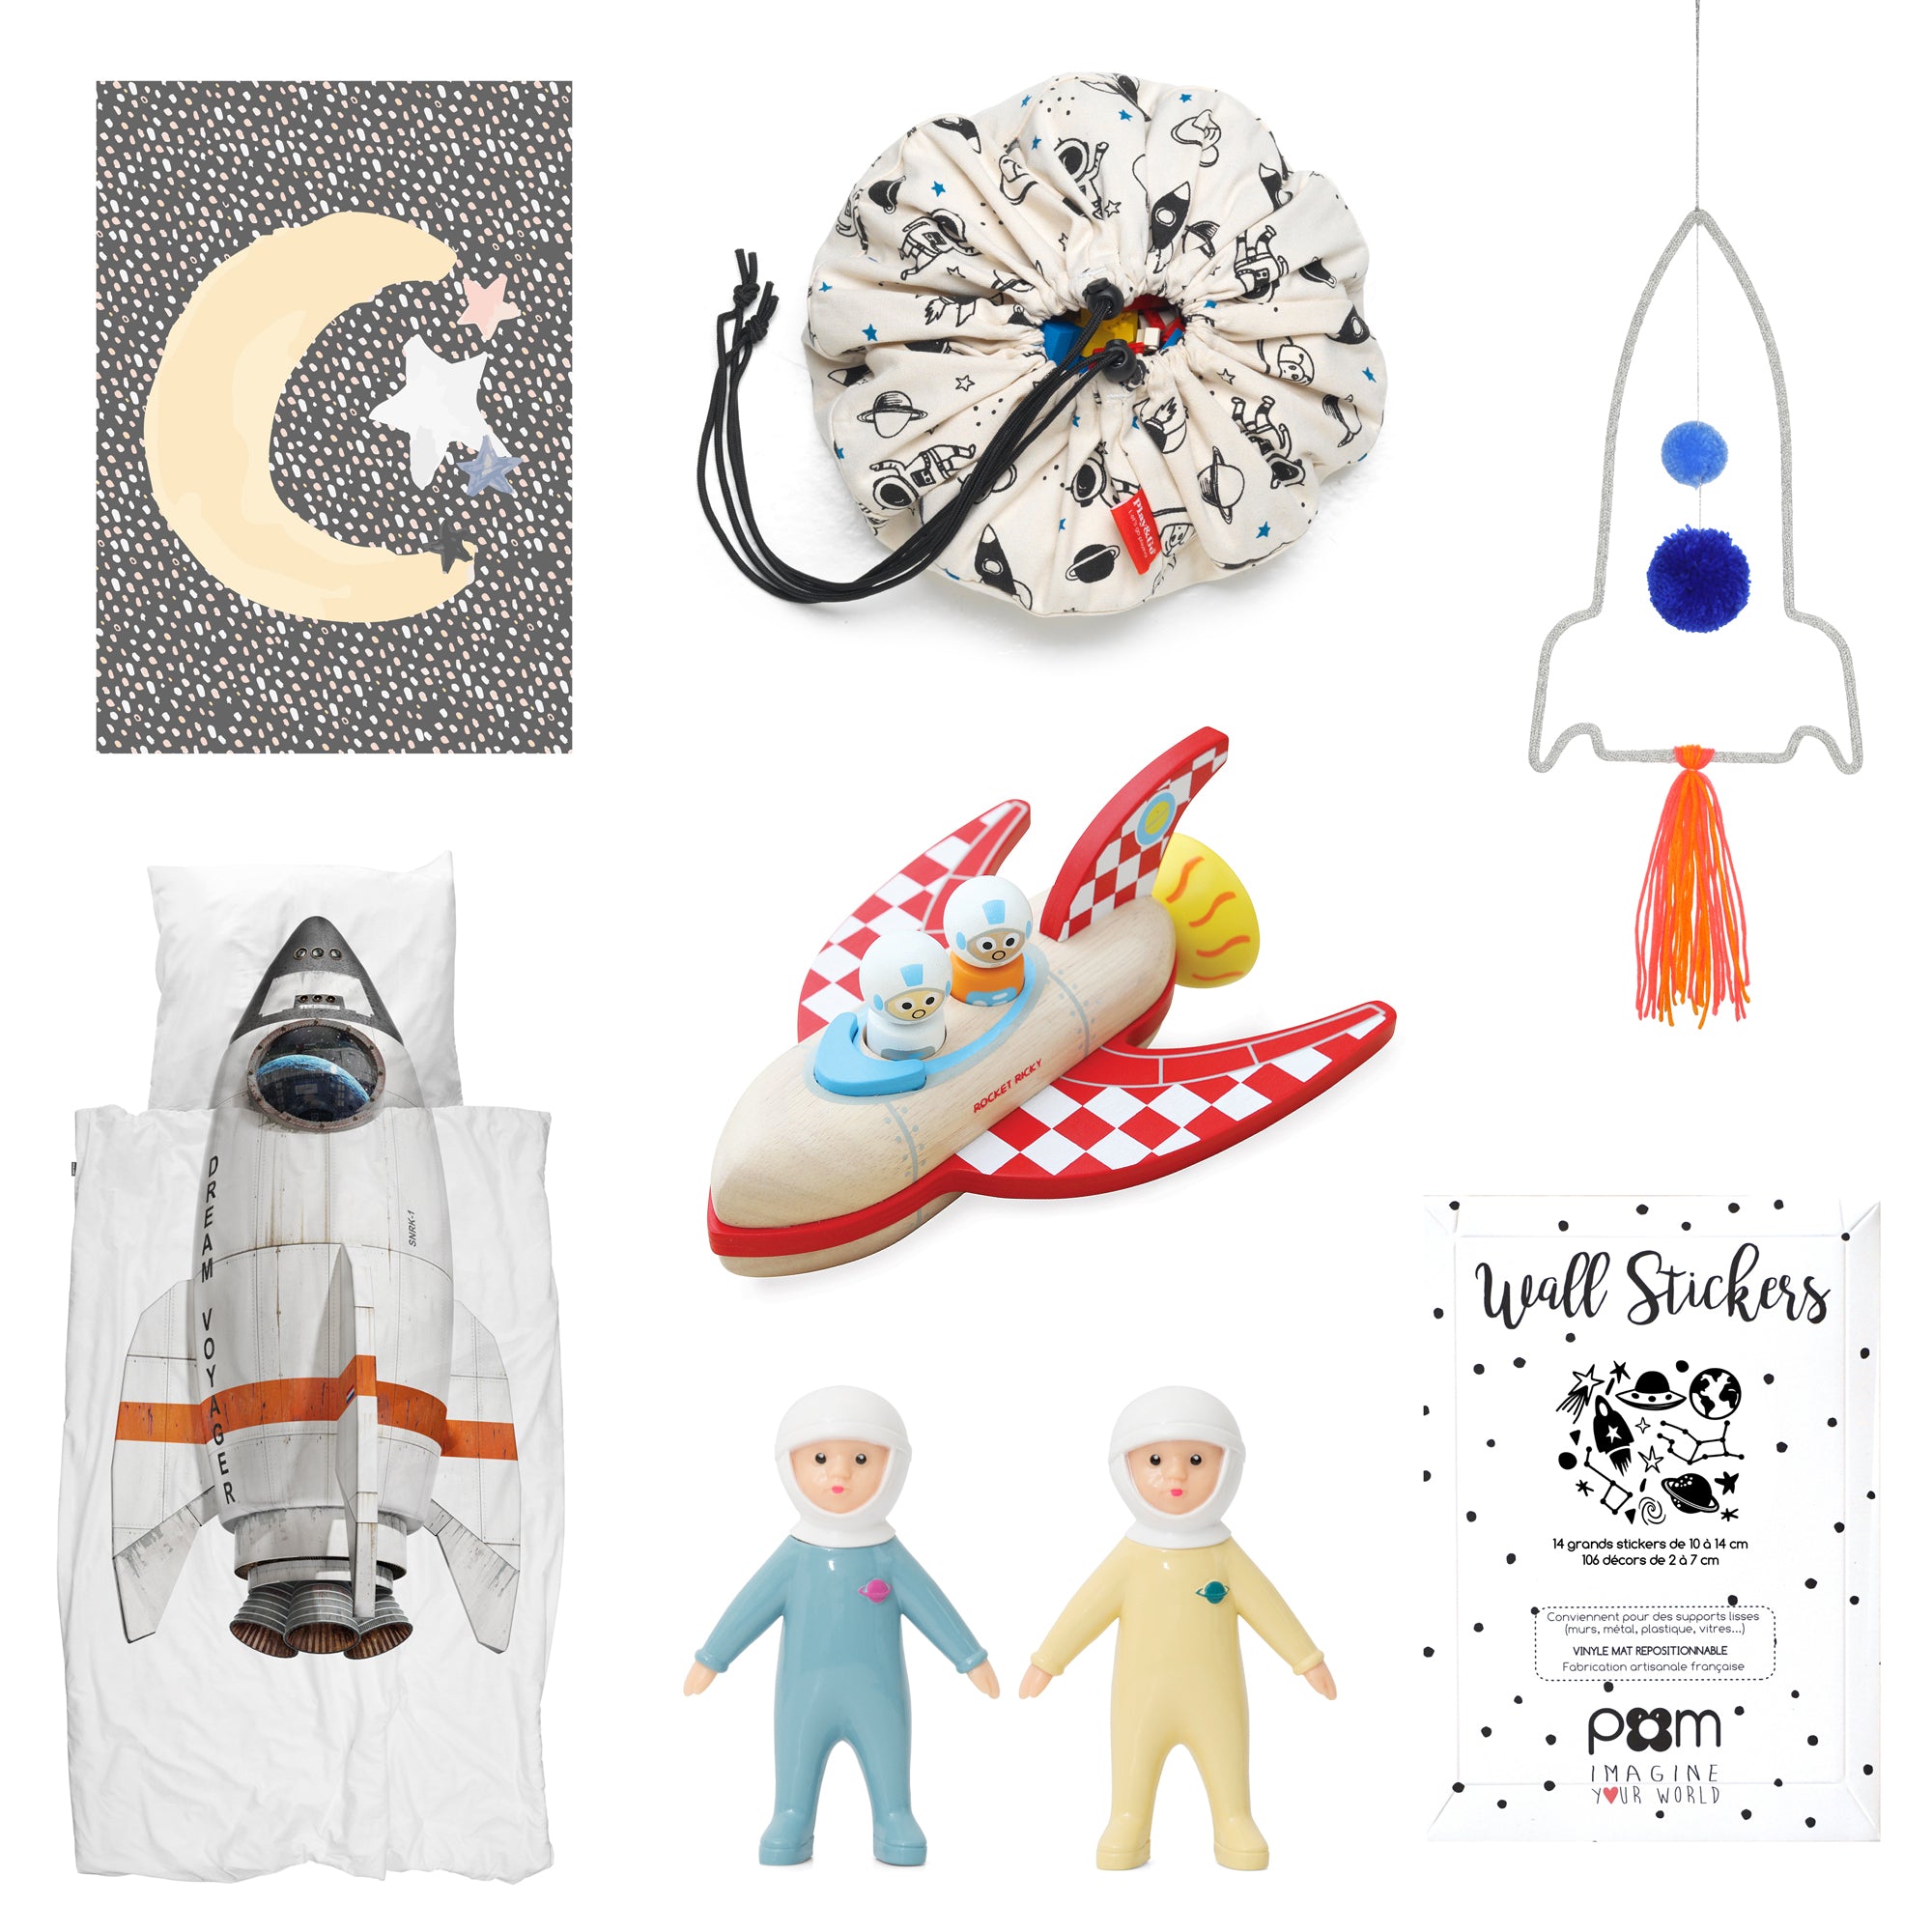 Space-themed children's room decor, available at Bobby Rabbit.